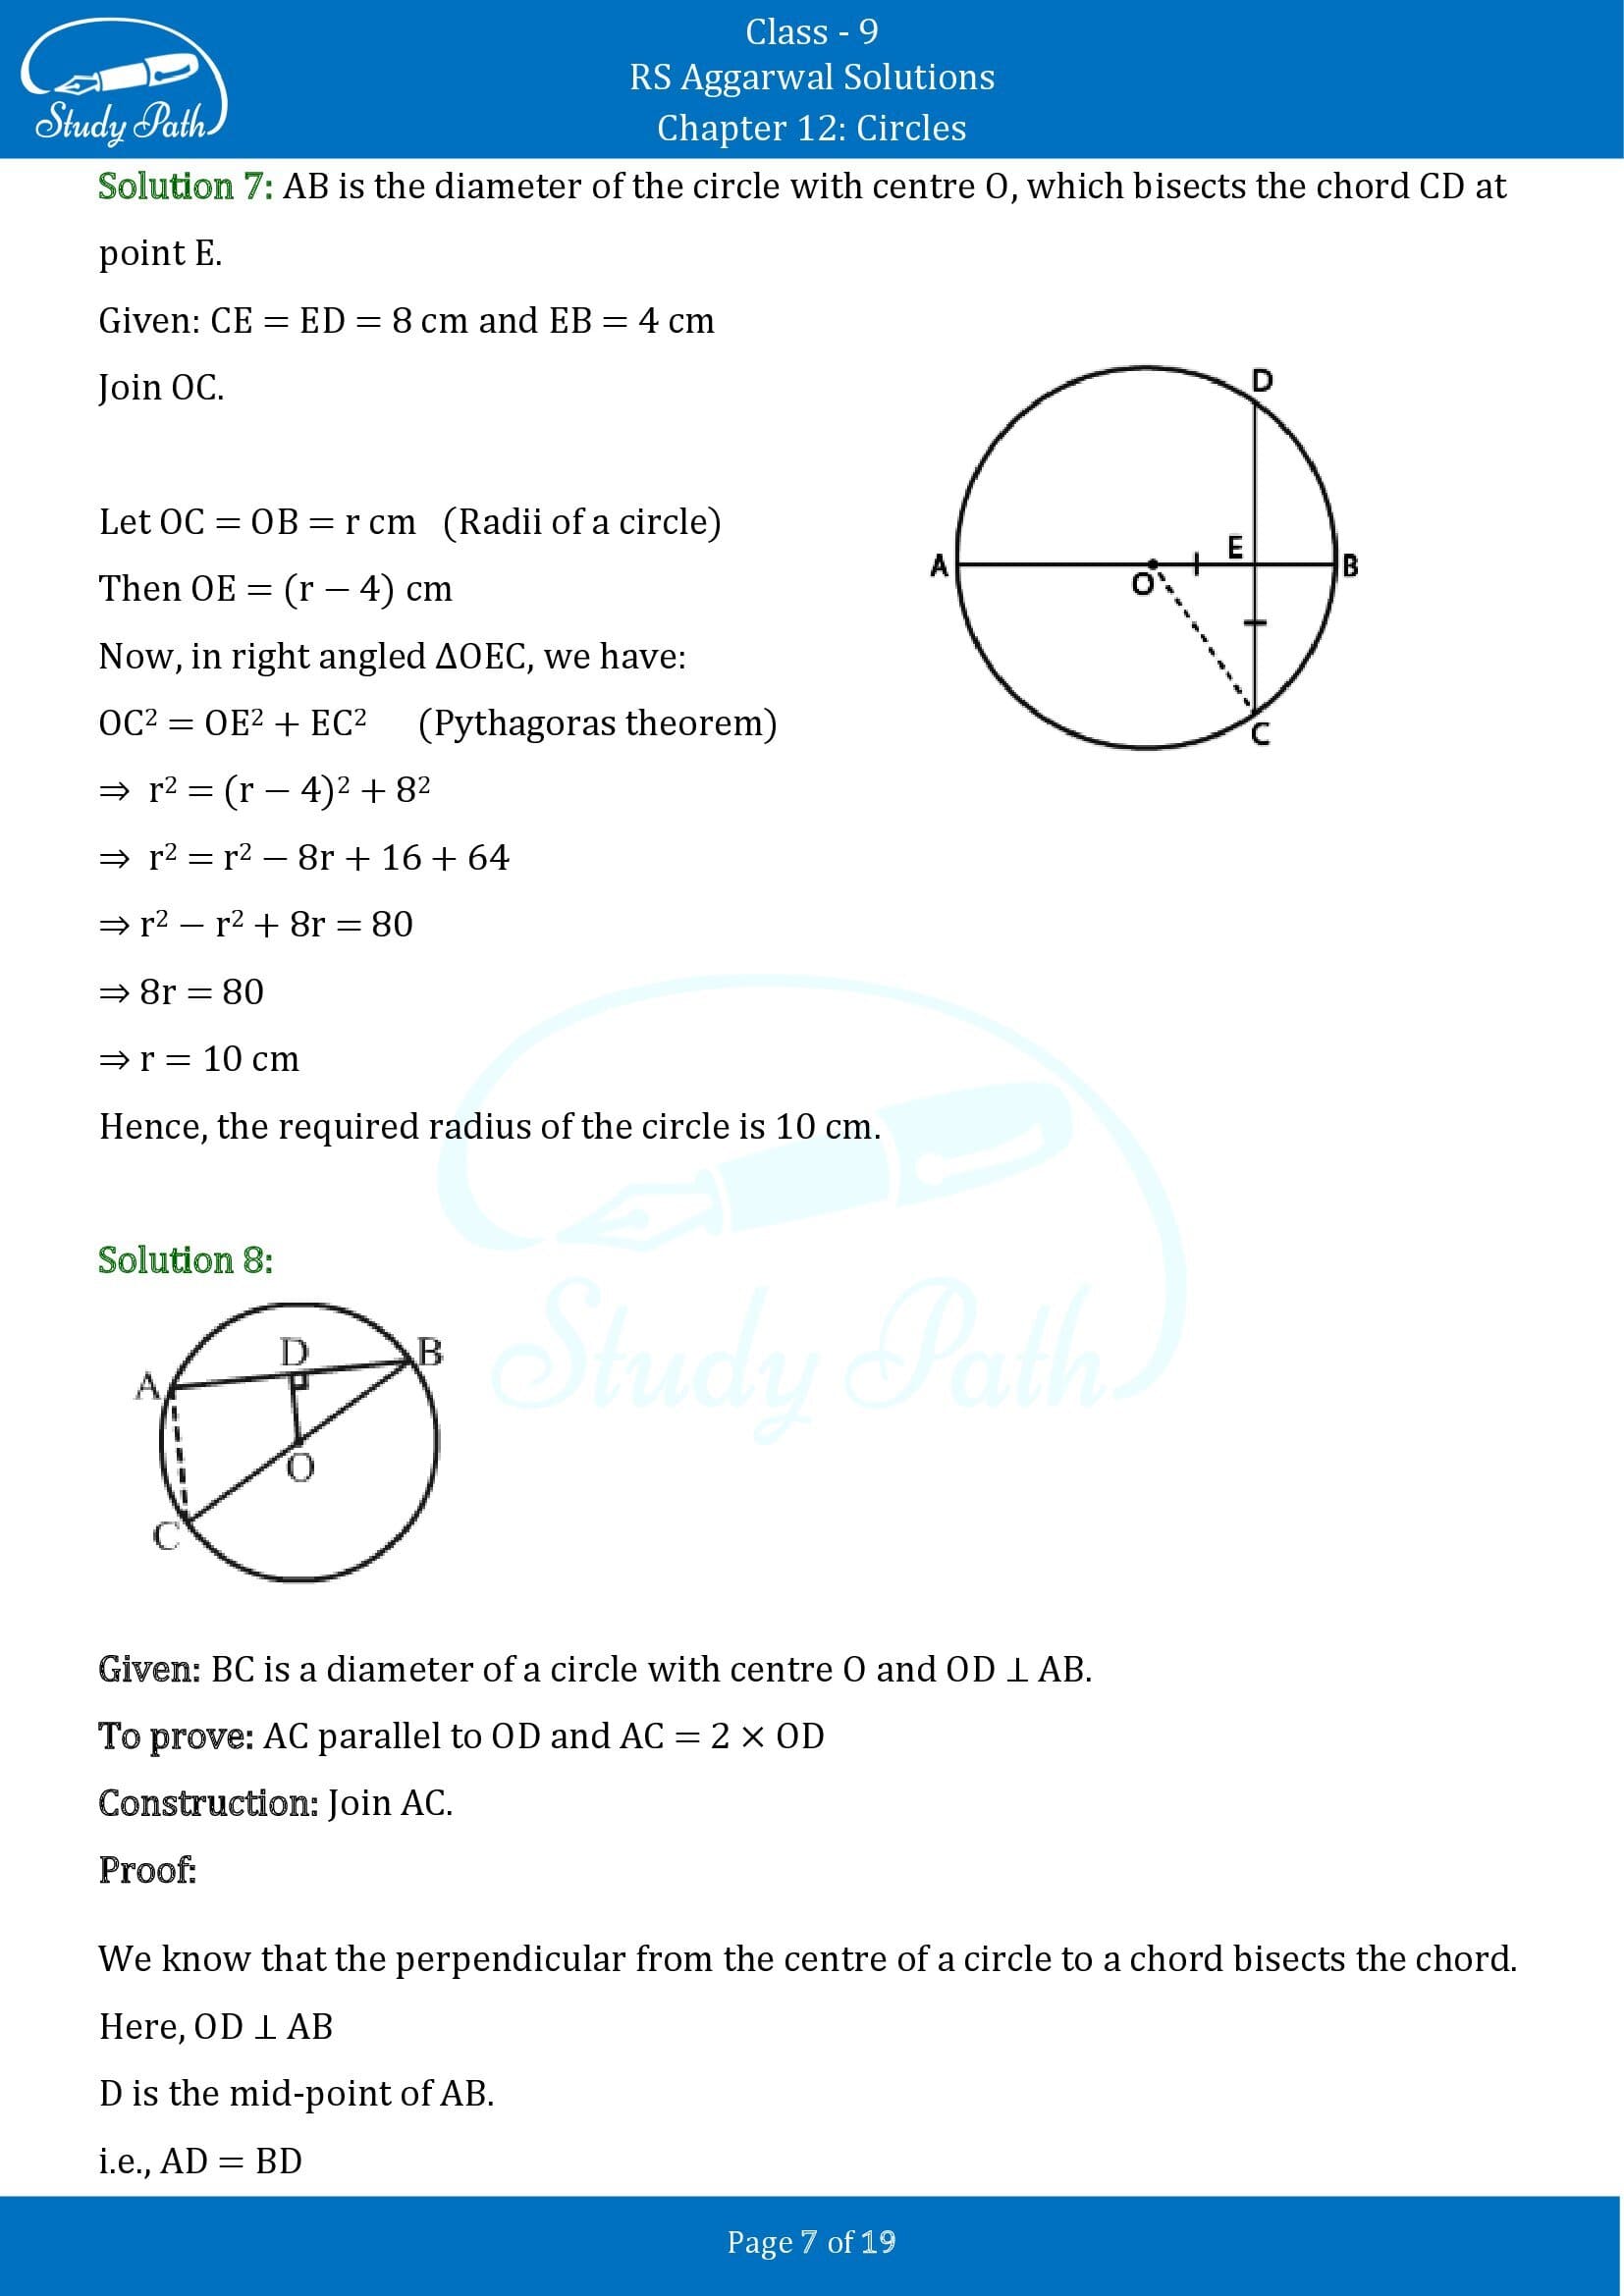 RS Aggarwal Solutions Class 9 Chapter 12 Circles Exercise 12A 00007